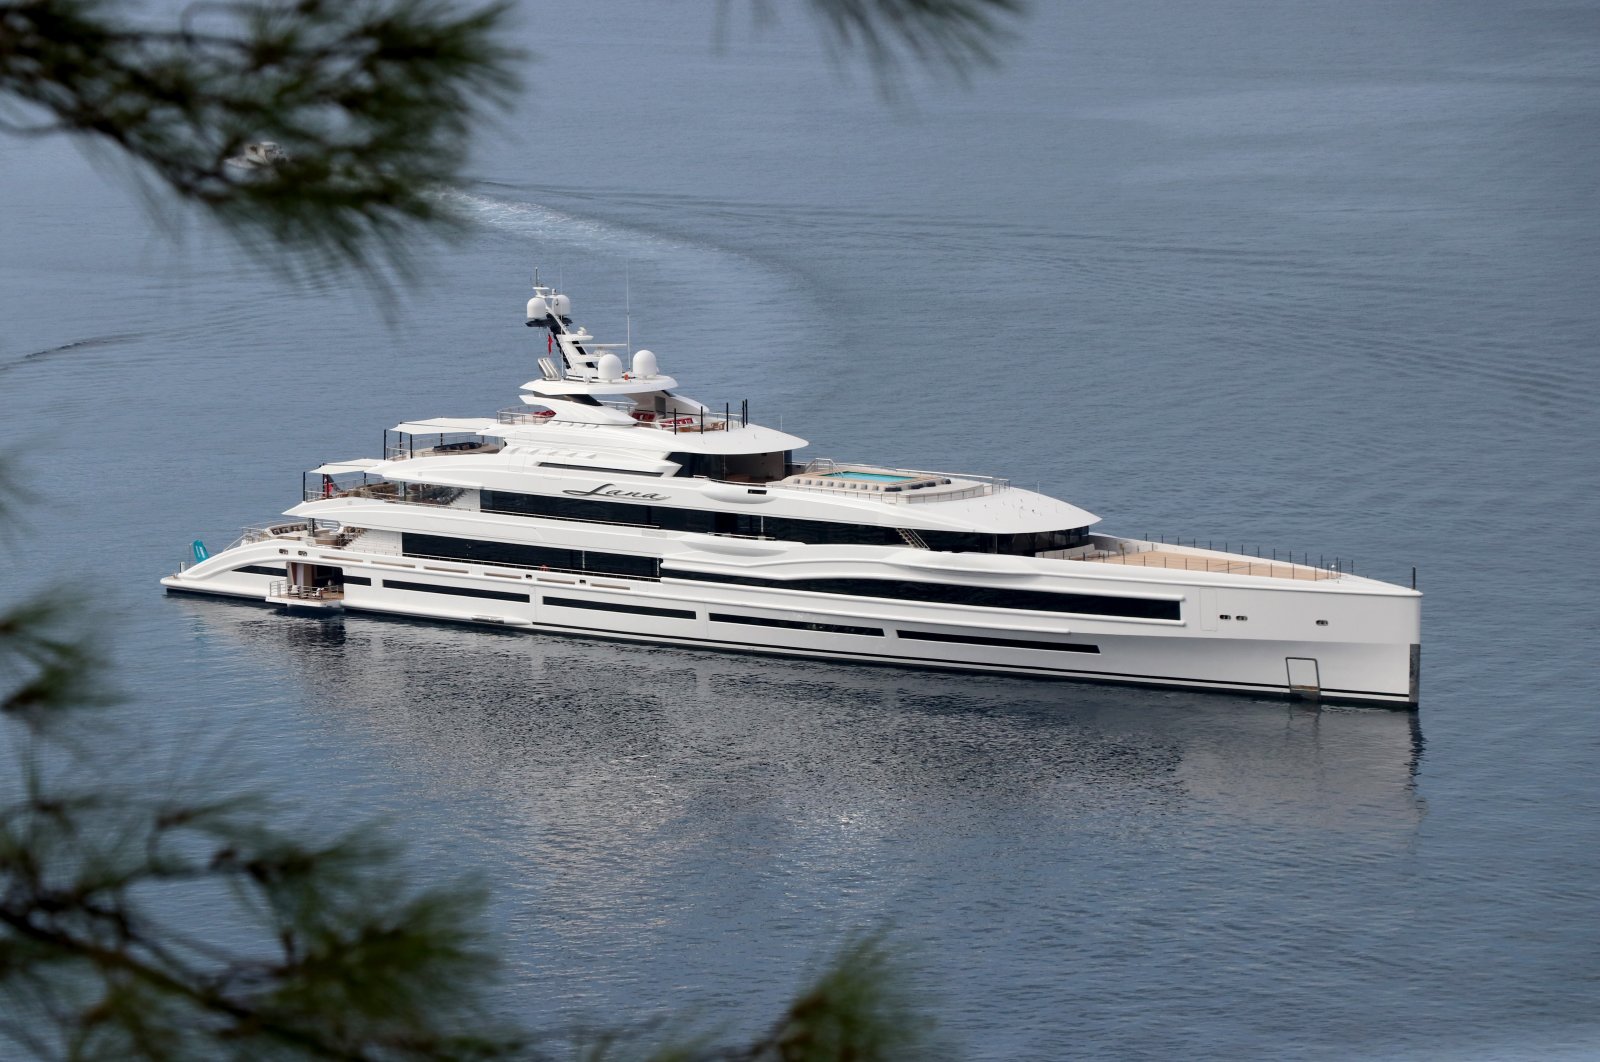 Microsoft founder Bill Gates’ 107-meter (350-foot) yacht, "Lana" can be seen anchored in a bay. (Photo by AA)